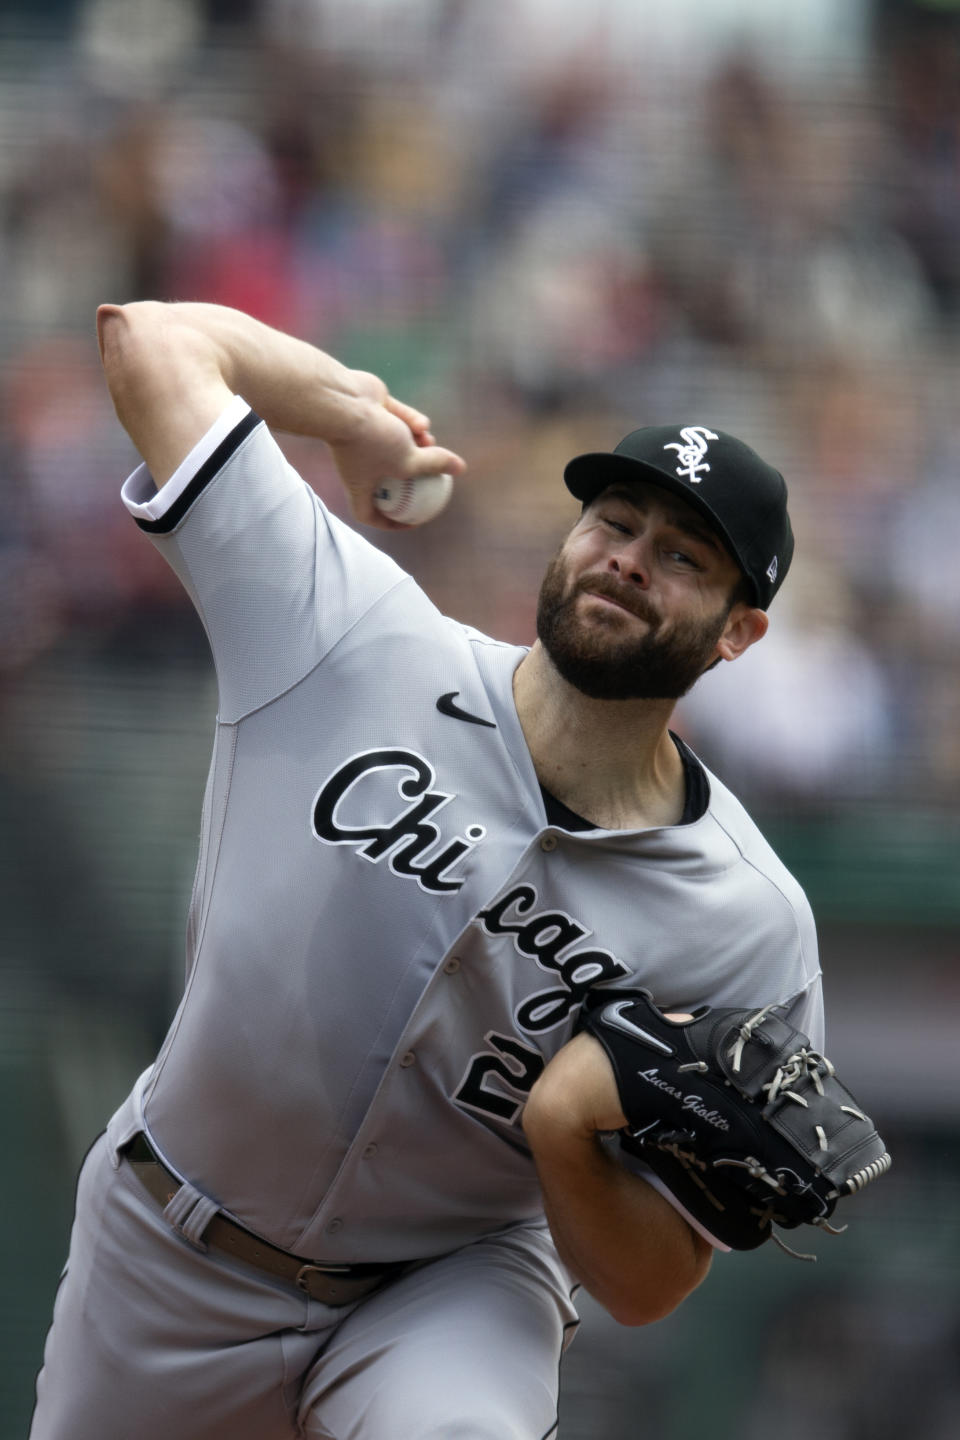 Chicago White Sox starting pitcher Lucas Giolito delivers a pitch against the San Francisco Giants during the first inning of a baseball game, Sunday, July 3, 2022, in San Francisco. (AP Photo/D. Ross Cameron)